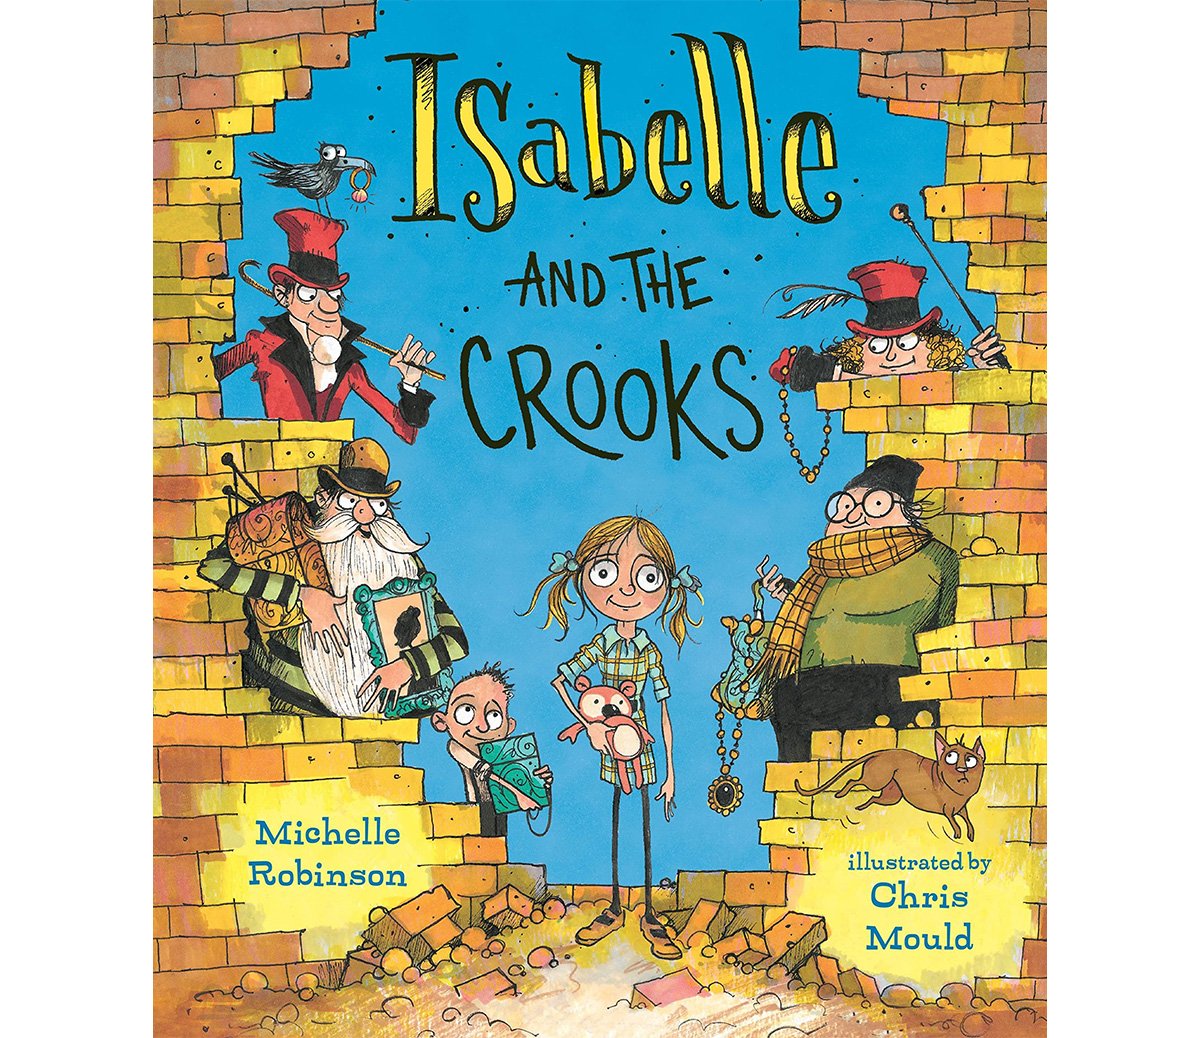 chris-mould-isabelle-and-the-crooks-cover-illustration.jpg